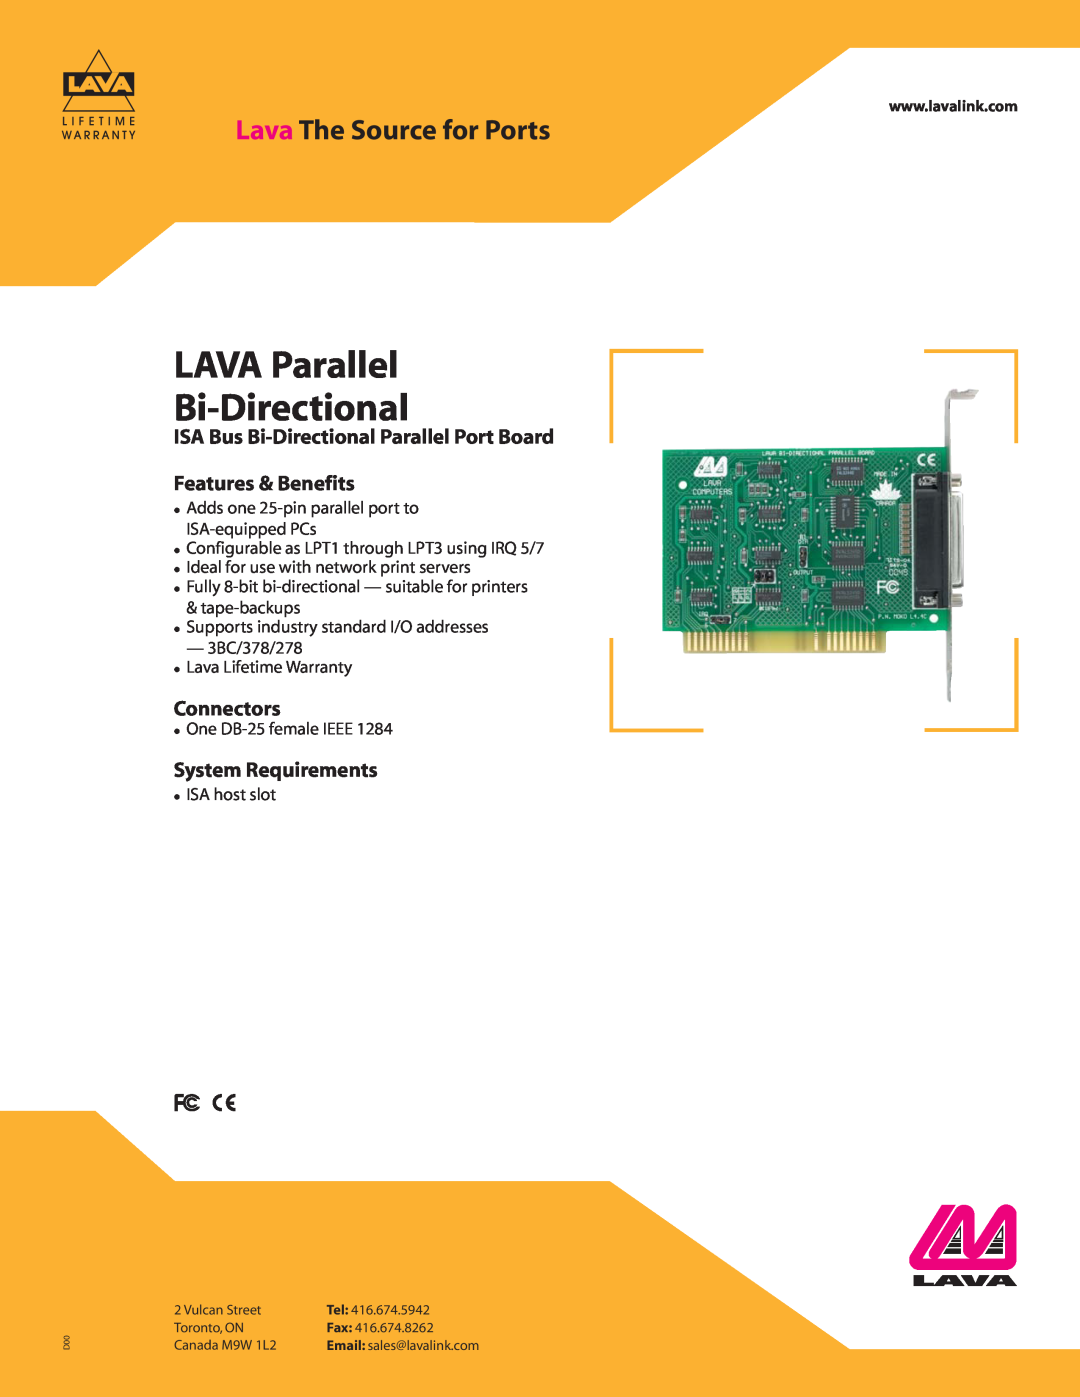 Lava Computer ISA Bus Bi-Directional Parallel Port Board warranty LAVA Parallel Bi-Directional, Lava The Source for Ports 